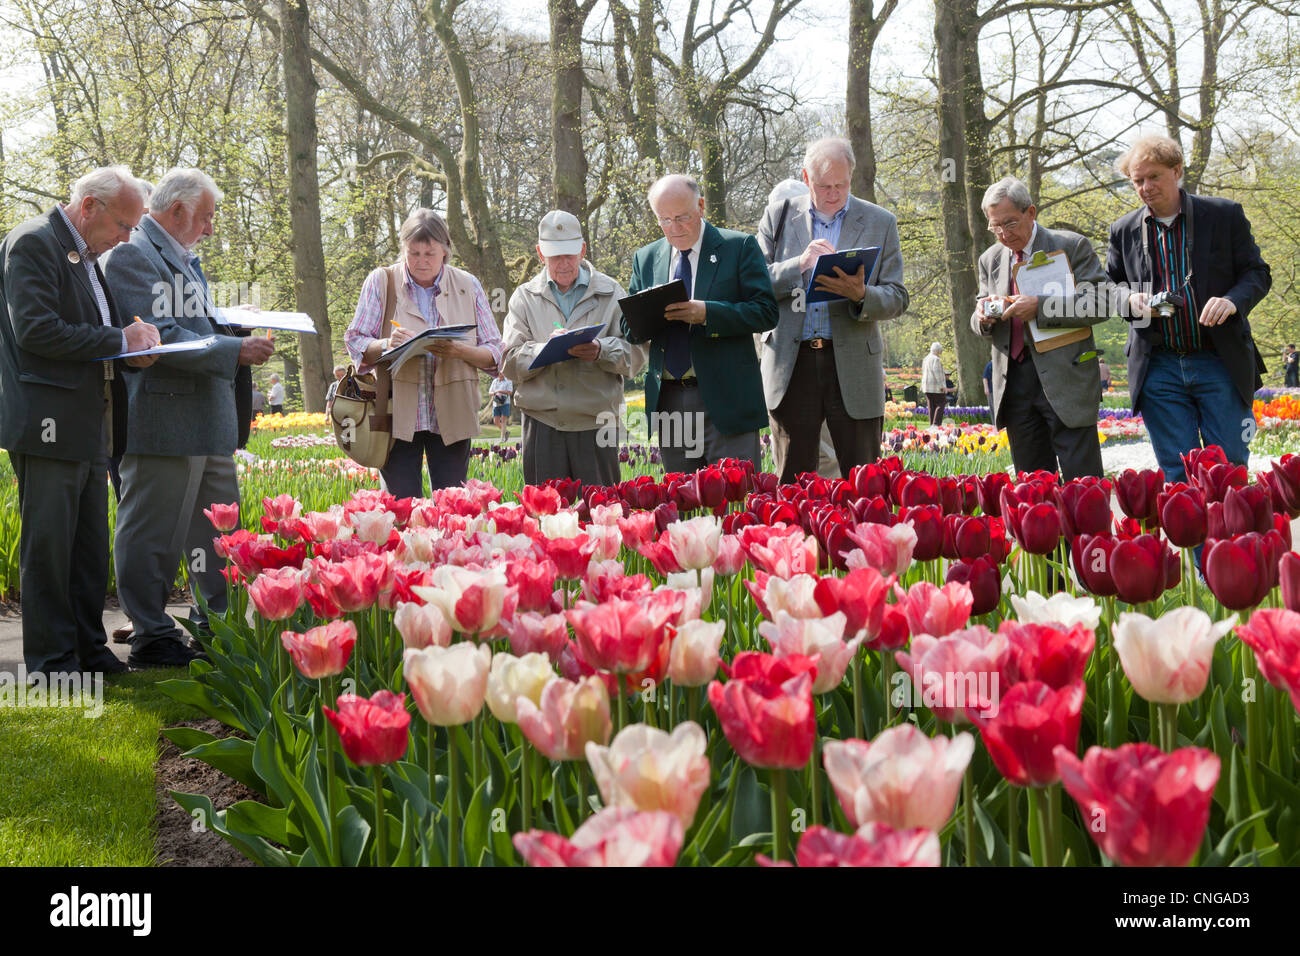 Keukenhof, Judges of the RHS (Royal Horticultural Society) from Kew Garden come to judge tulips and others bulbous plants. Stock Photo